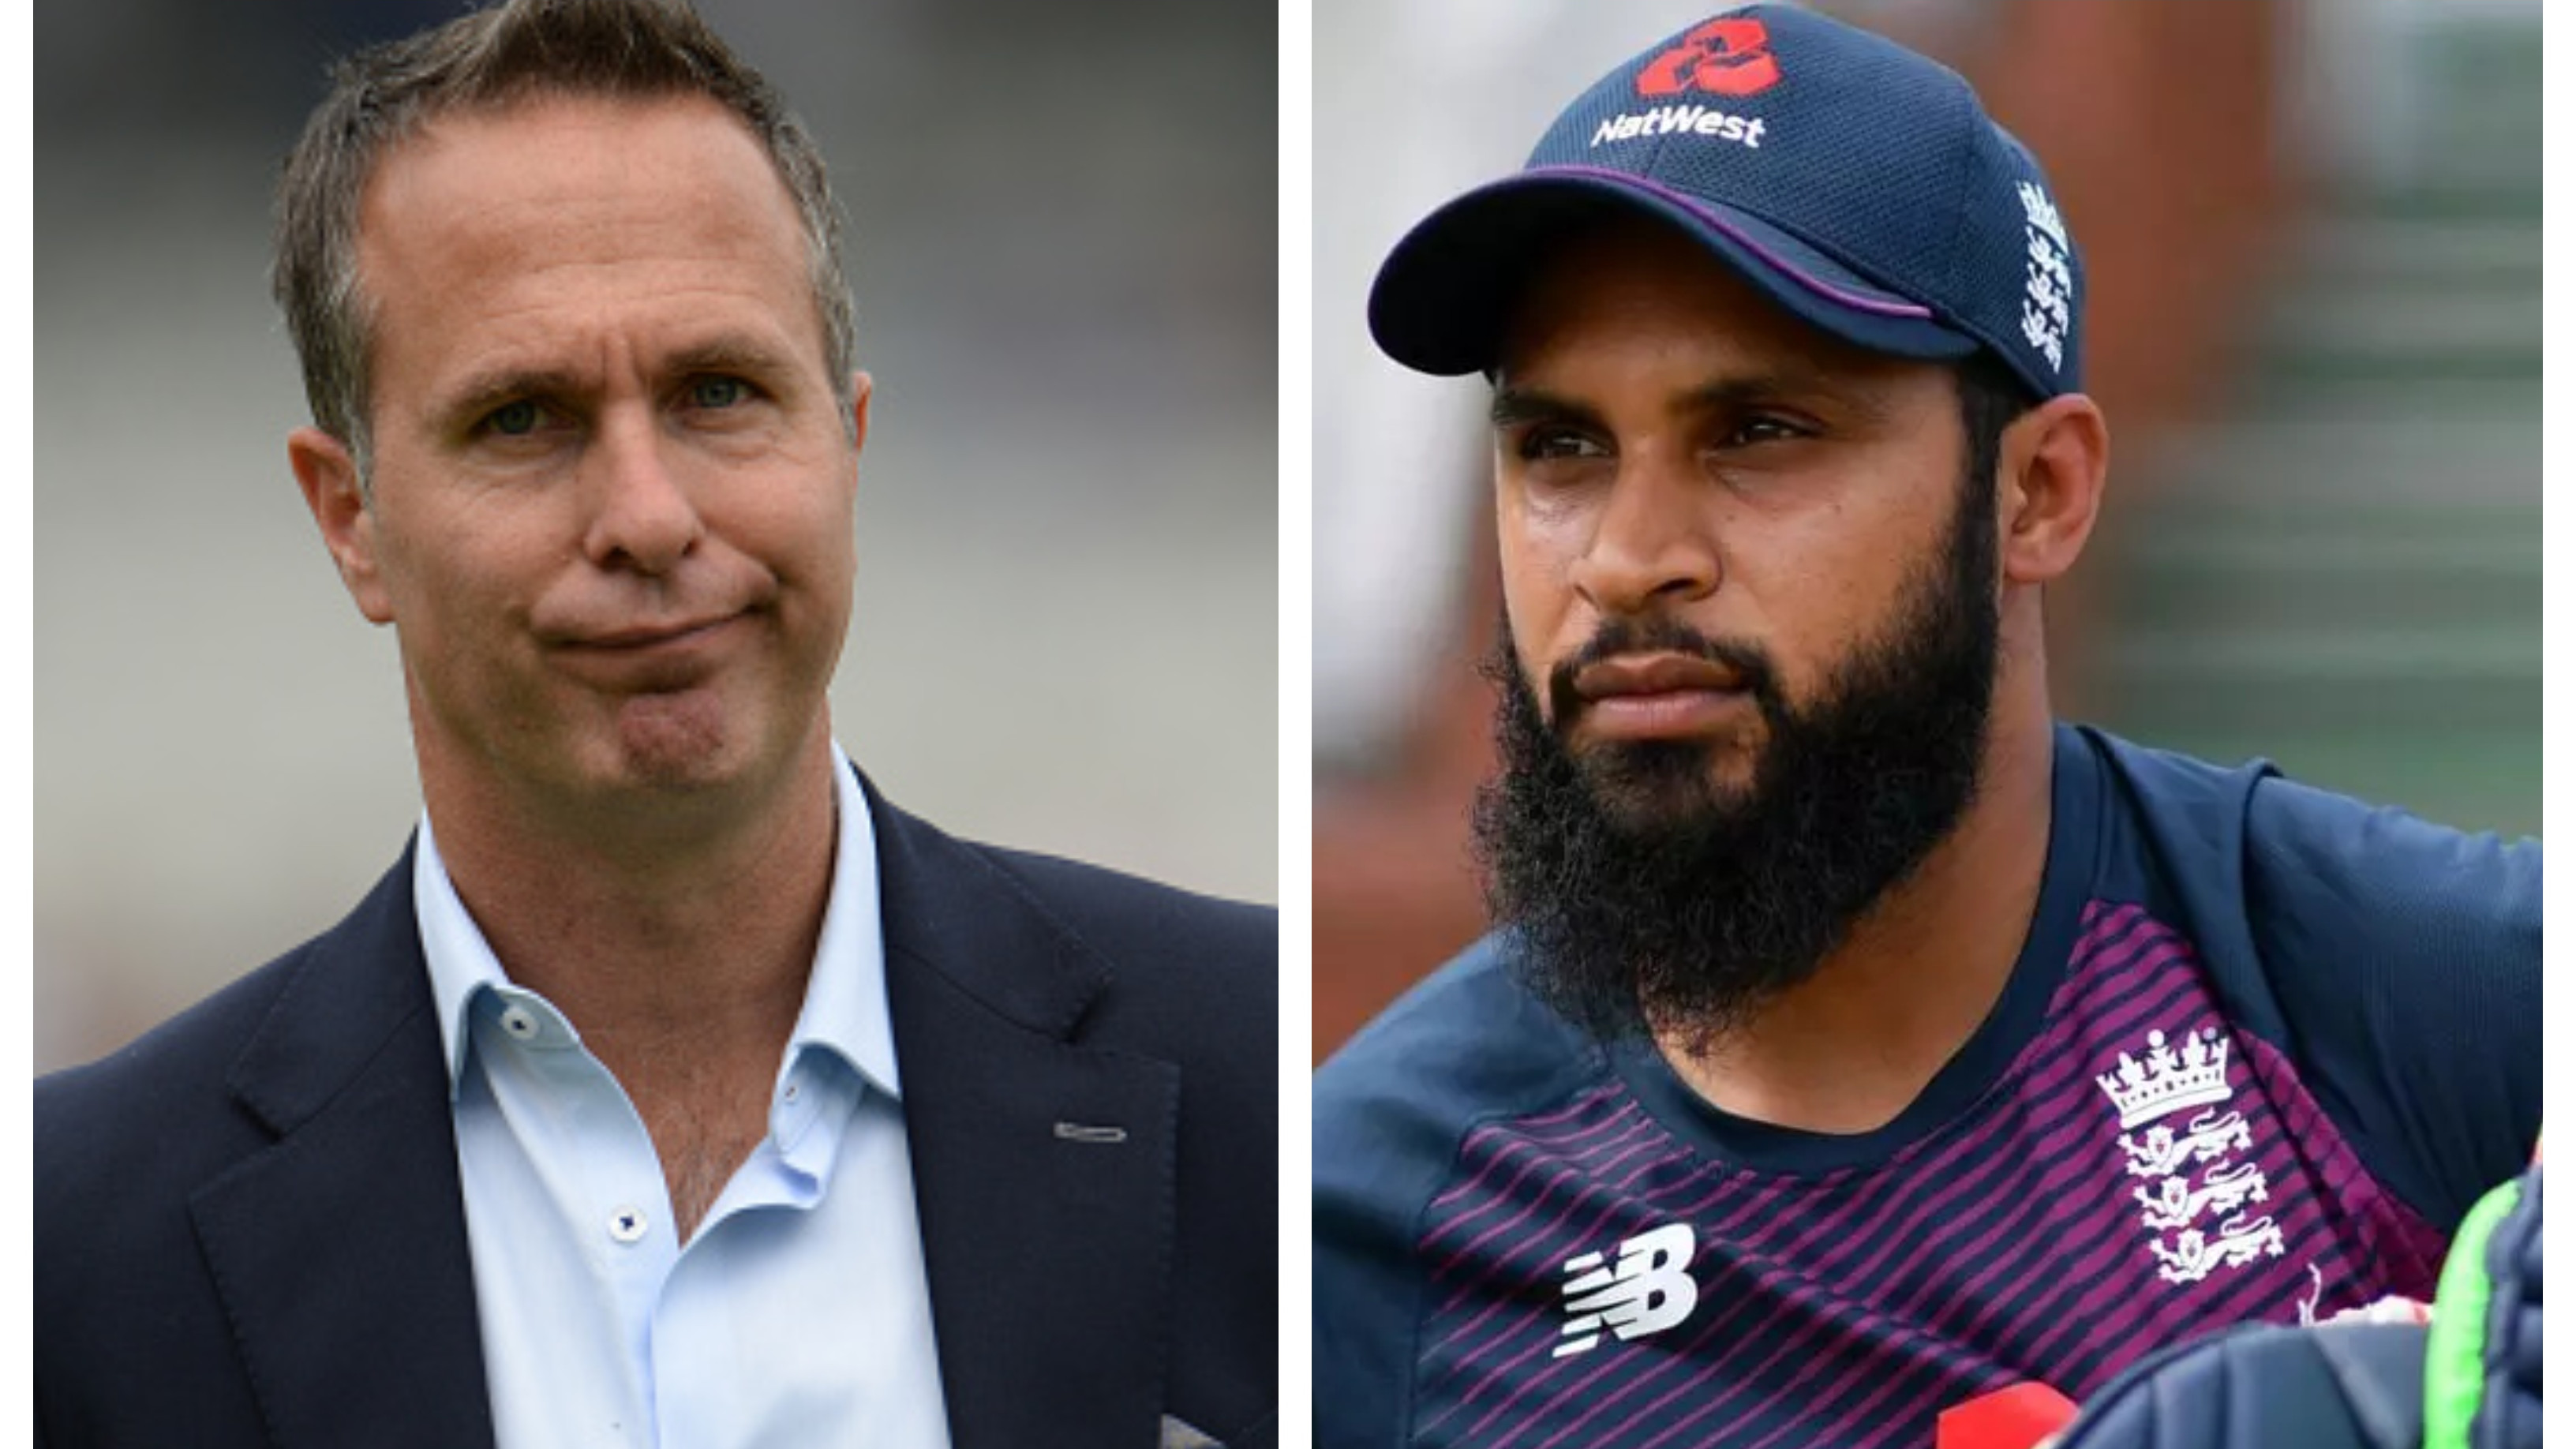 Vaughan reiterates his denial over racism charges after Adil Rashid supports ex-Yorkshire player Azeem Rafiq